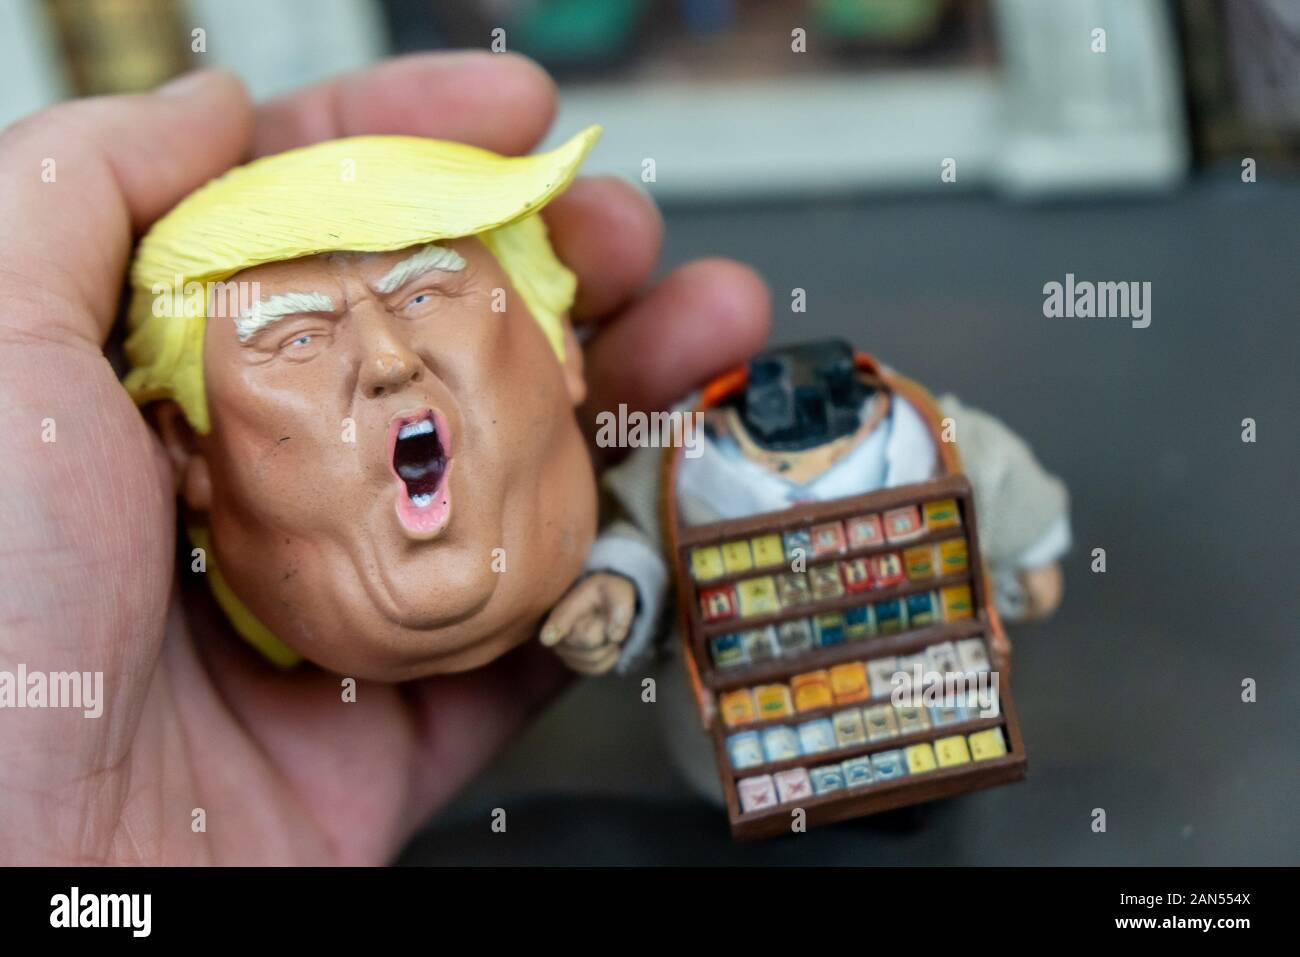 A wacky miniature of American president Donald Trump selling cigarettes and Japanese prime minister Shinzo Abe selling pop corns on the street were pr Stock Photo